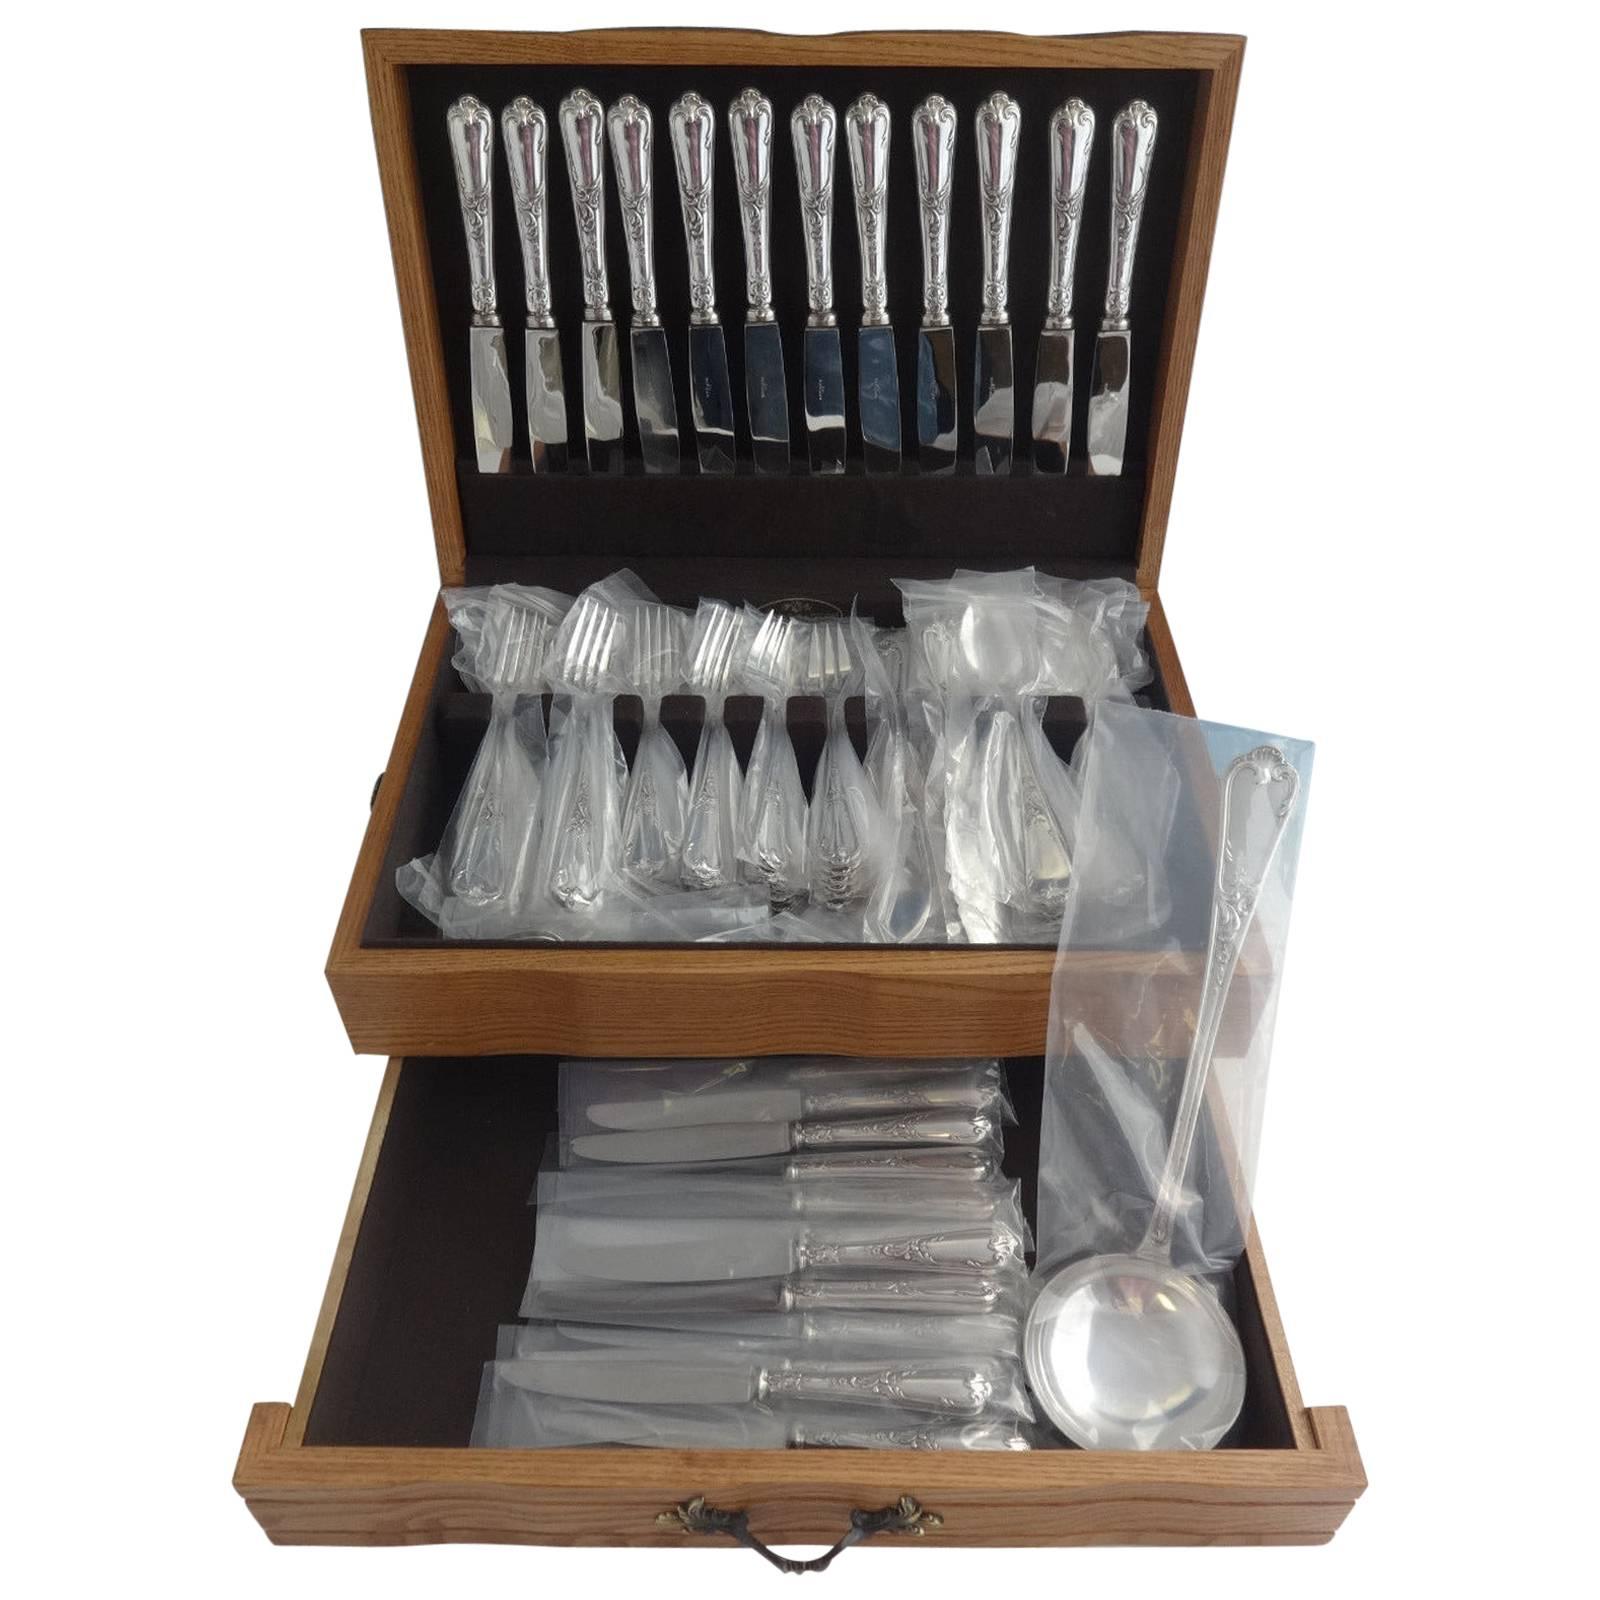 Louis XV by Ercuis French silver plate flatware set, 88 pieces. This set includes:

12 dinner knives, 10